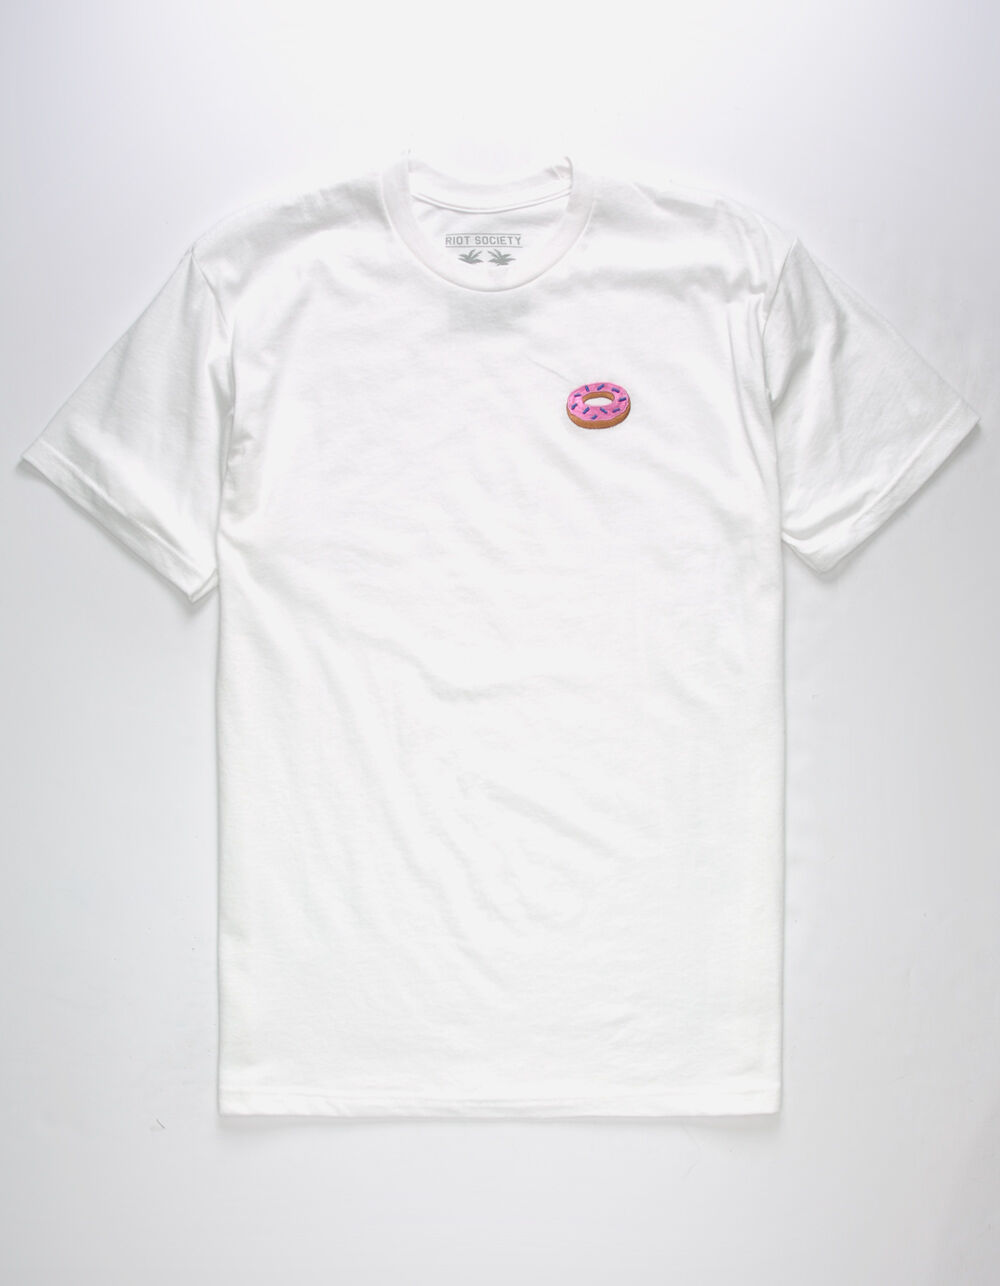 RIOT SOCIETY Donut Embroidery Mens T-Shirt image number 0